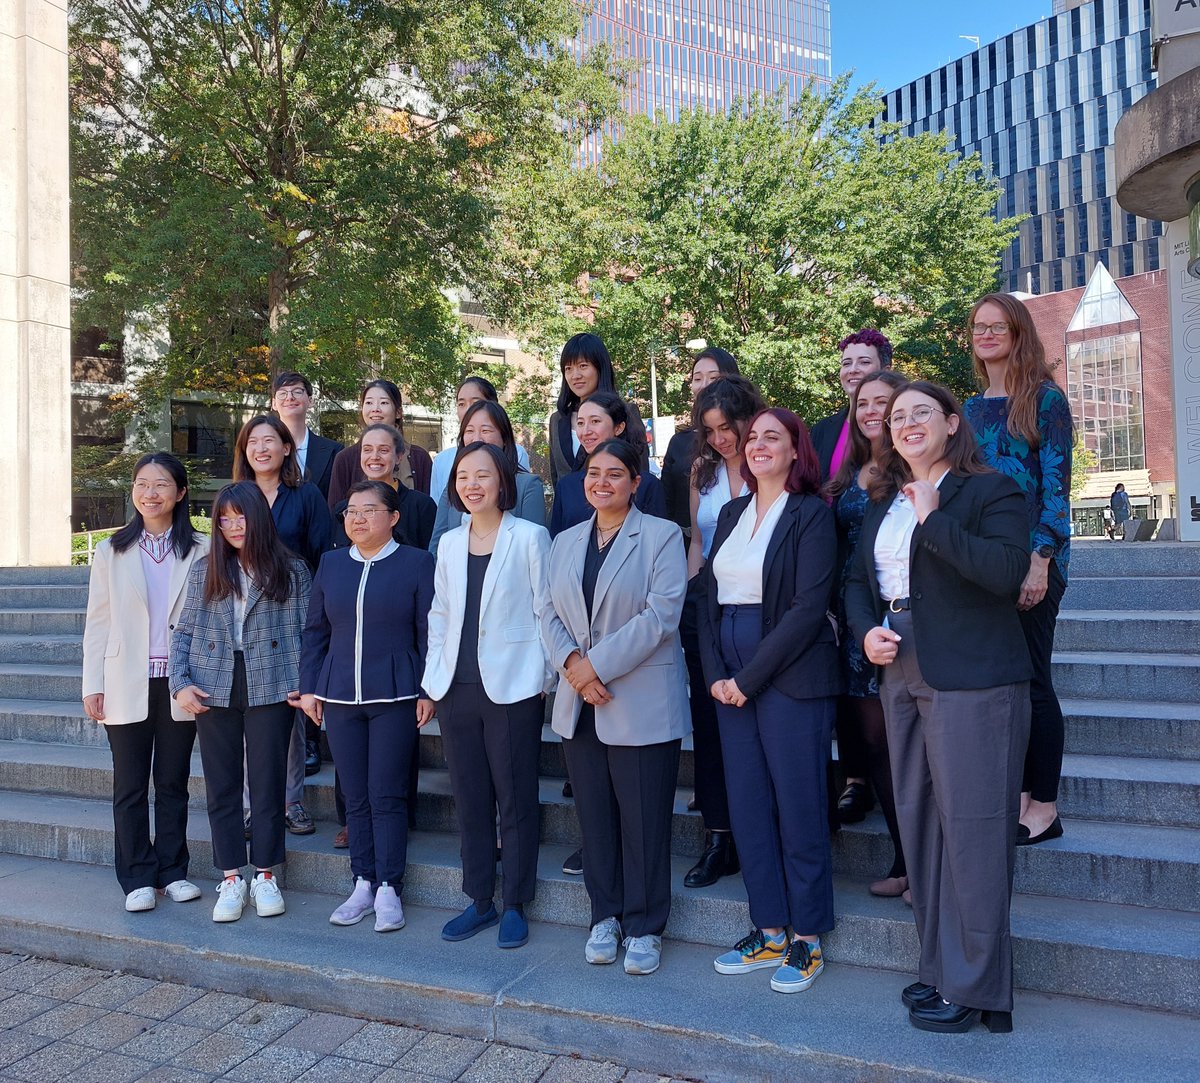 Here they are- the 2023 Rising Stars in Chemical Engineering. So much talent and brainpower in one picture! @MITChemE @MITEngineering @MITCommLab #futurefaculty #ChemE #womeninSTEM @ChEnected @aichewic @MacAiche